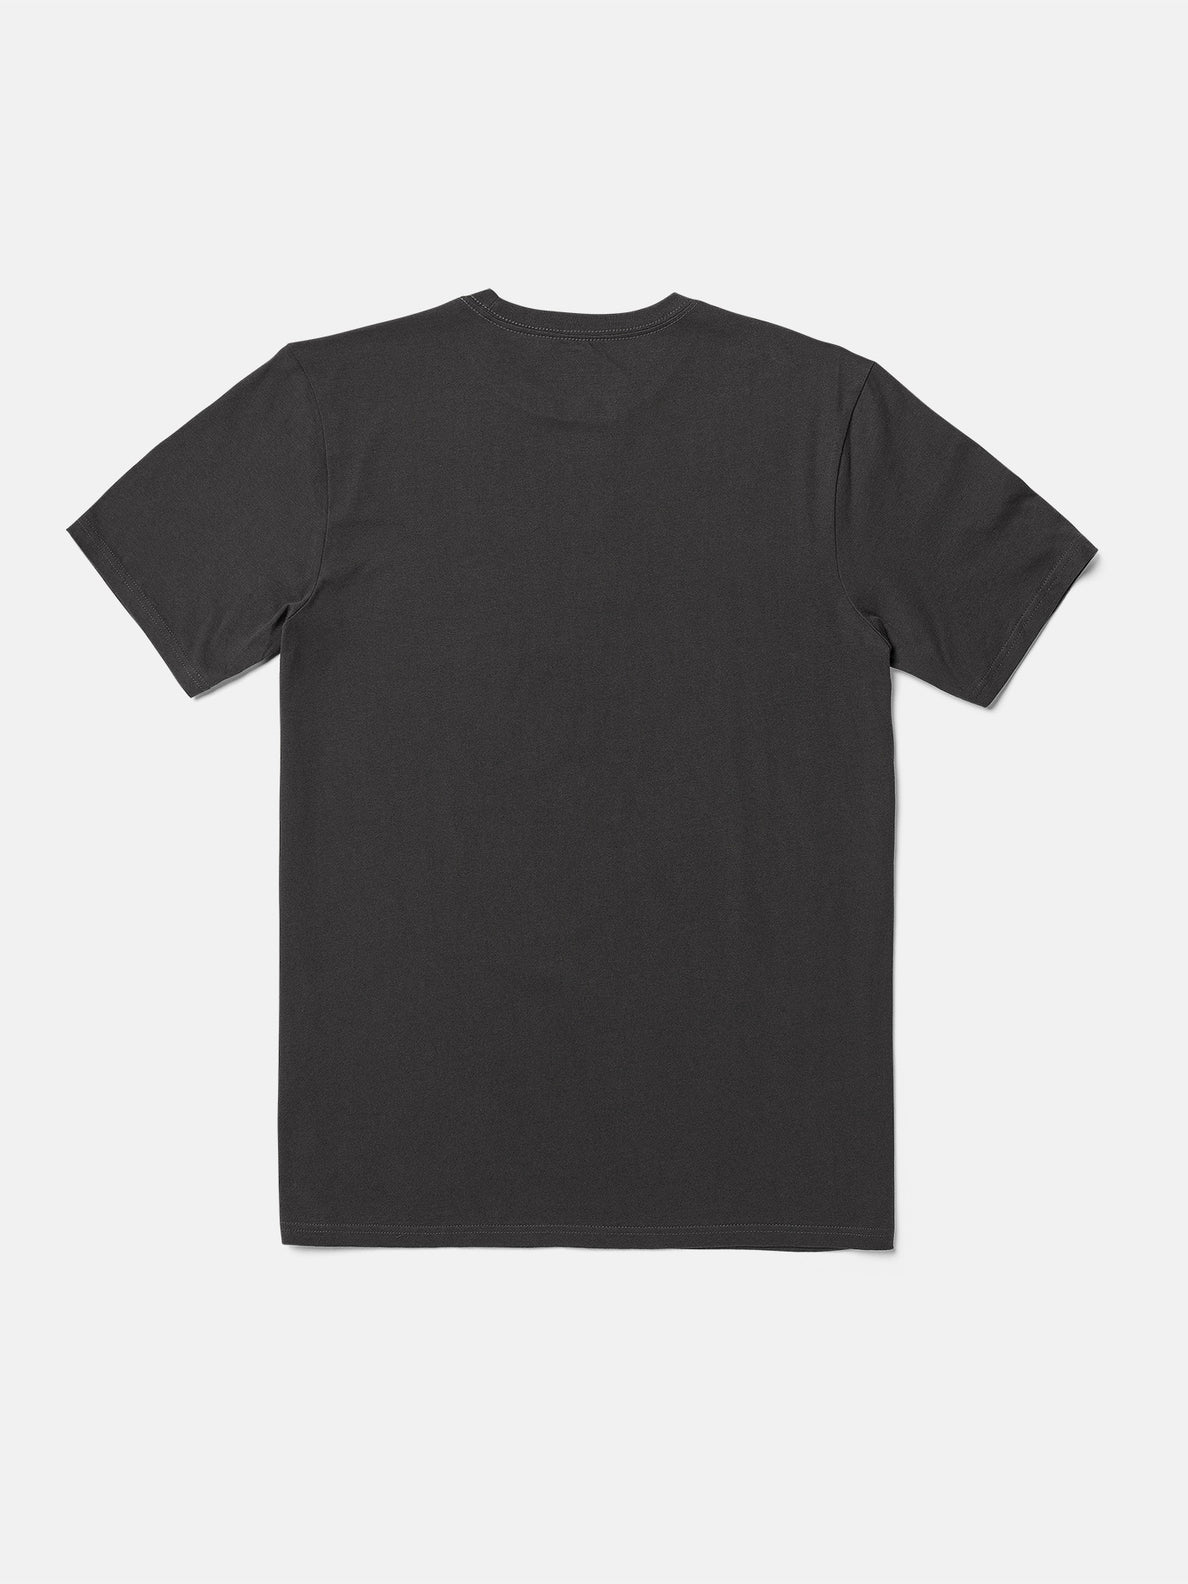 Twisted Up Short Sleeve Tee - Stealth